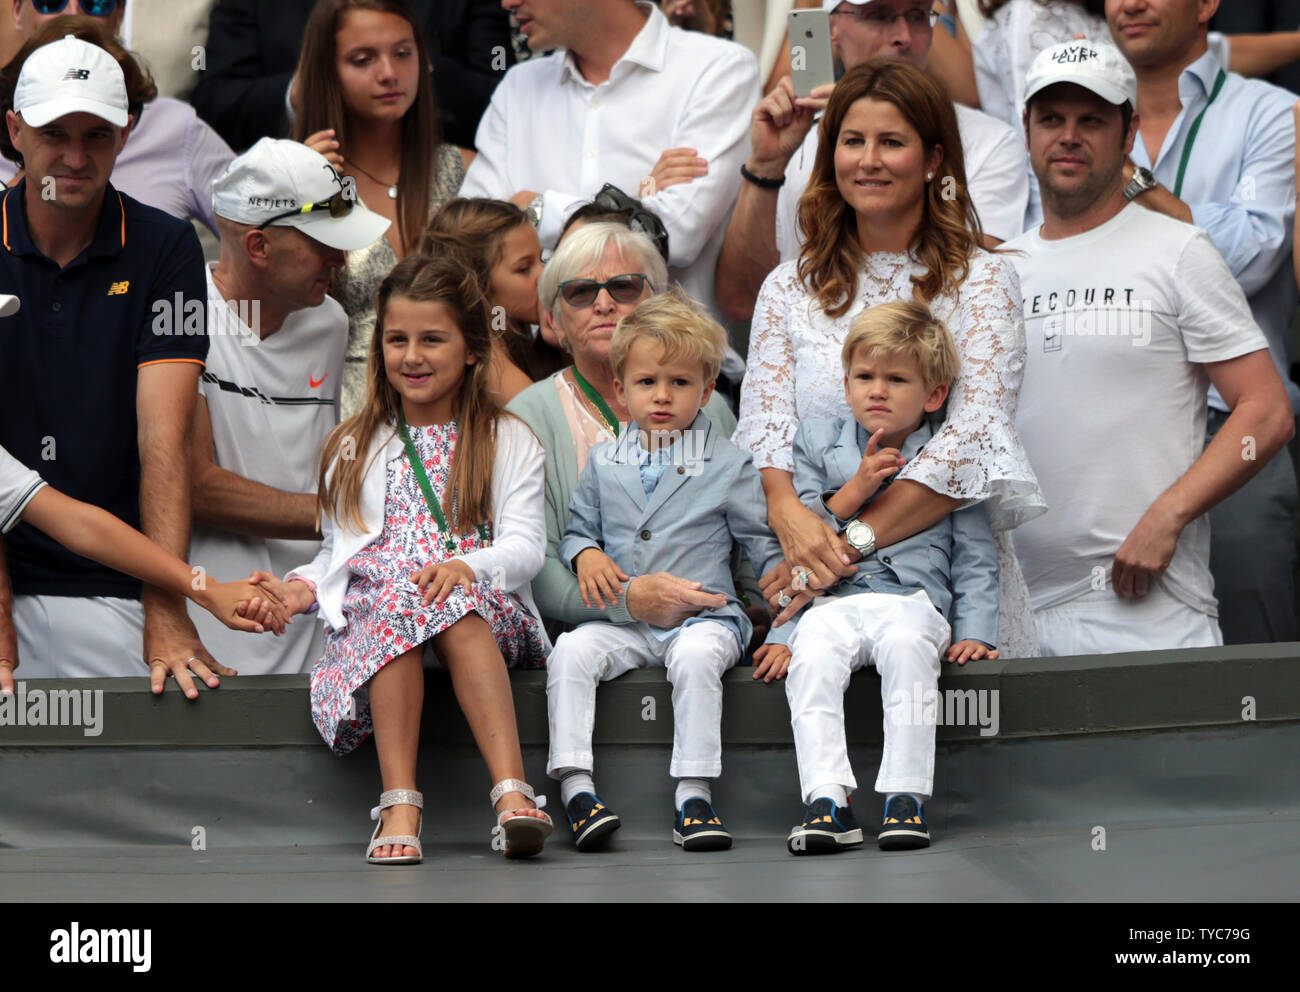 Swiss Roger Federer's family occupies the players box after Roger Federer won the Wimbledon Singles trophy beating Croat Marin Cilic at the 2017 Wimbledon championships, London on July 16, 2017. Federer beat Cilic 6-3, 6-1, 6-4, to win his eighth Wimbledon Men's Singles Final.     Photo by Hugo Philpott/UPI Stock Photo